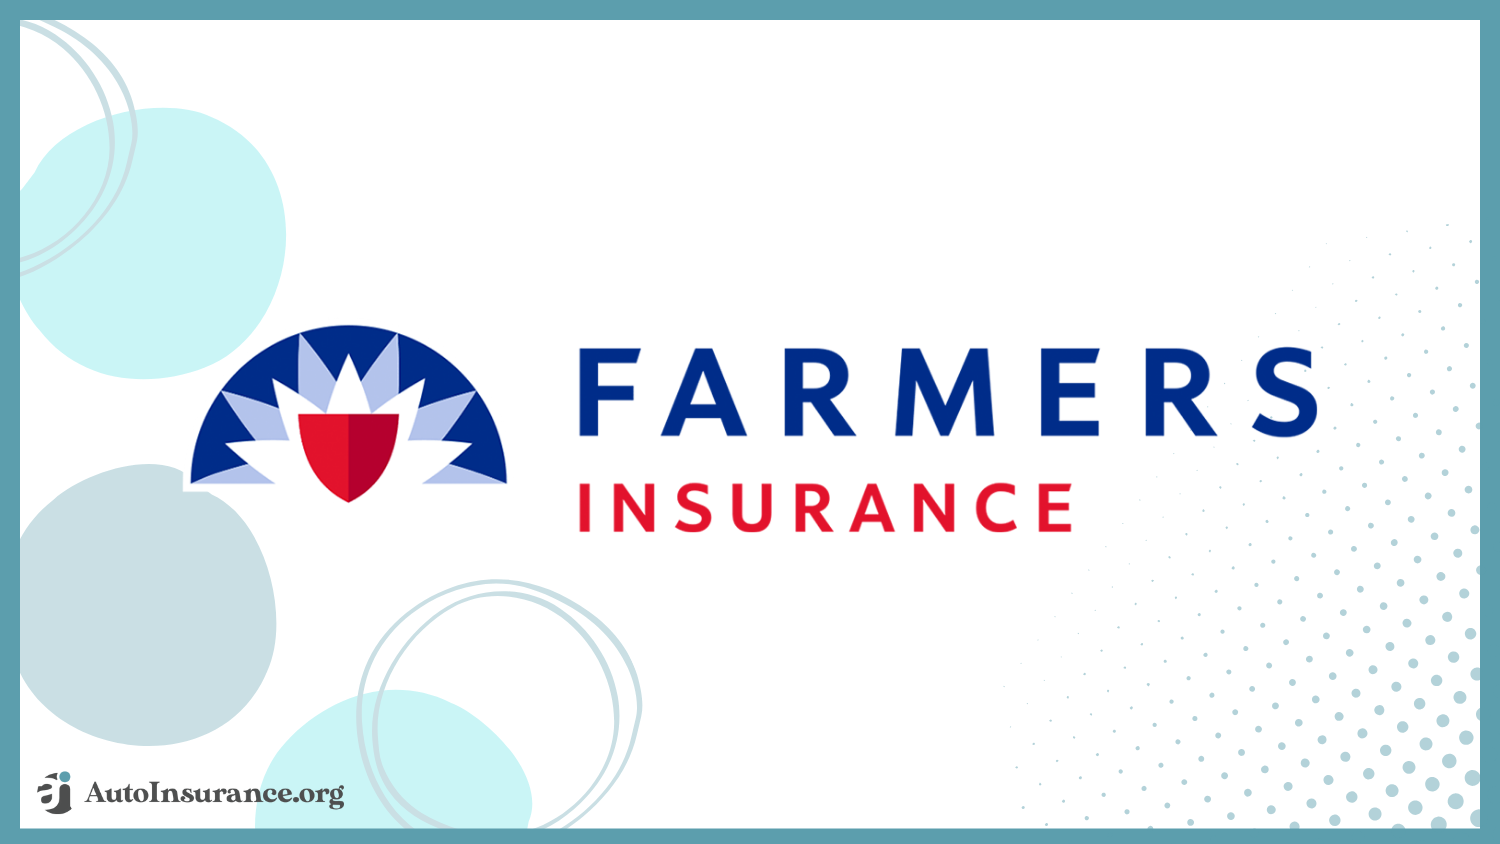 Farmers Cheap Auto Insurance for Home Care Workers